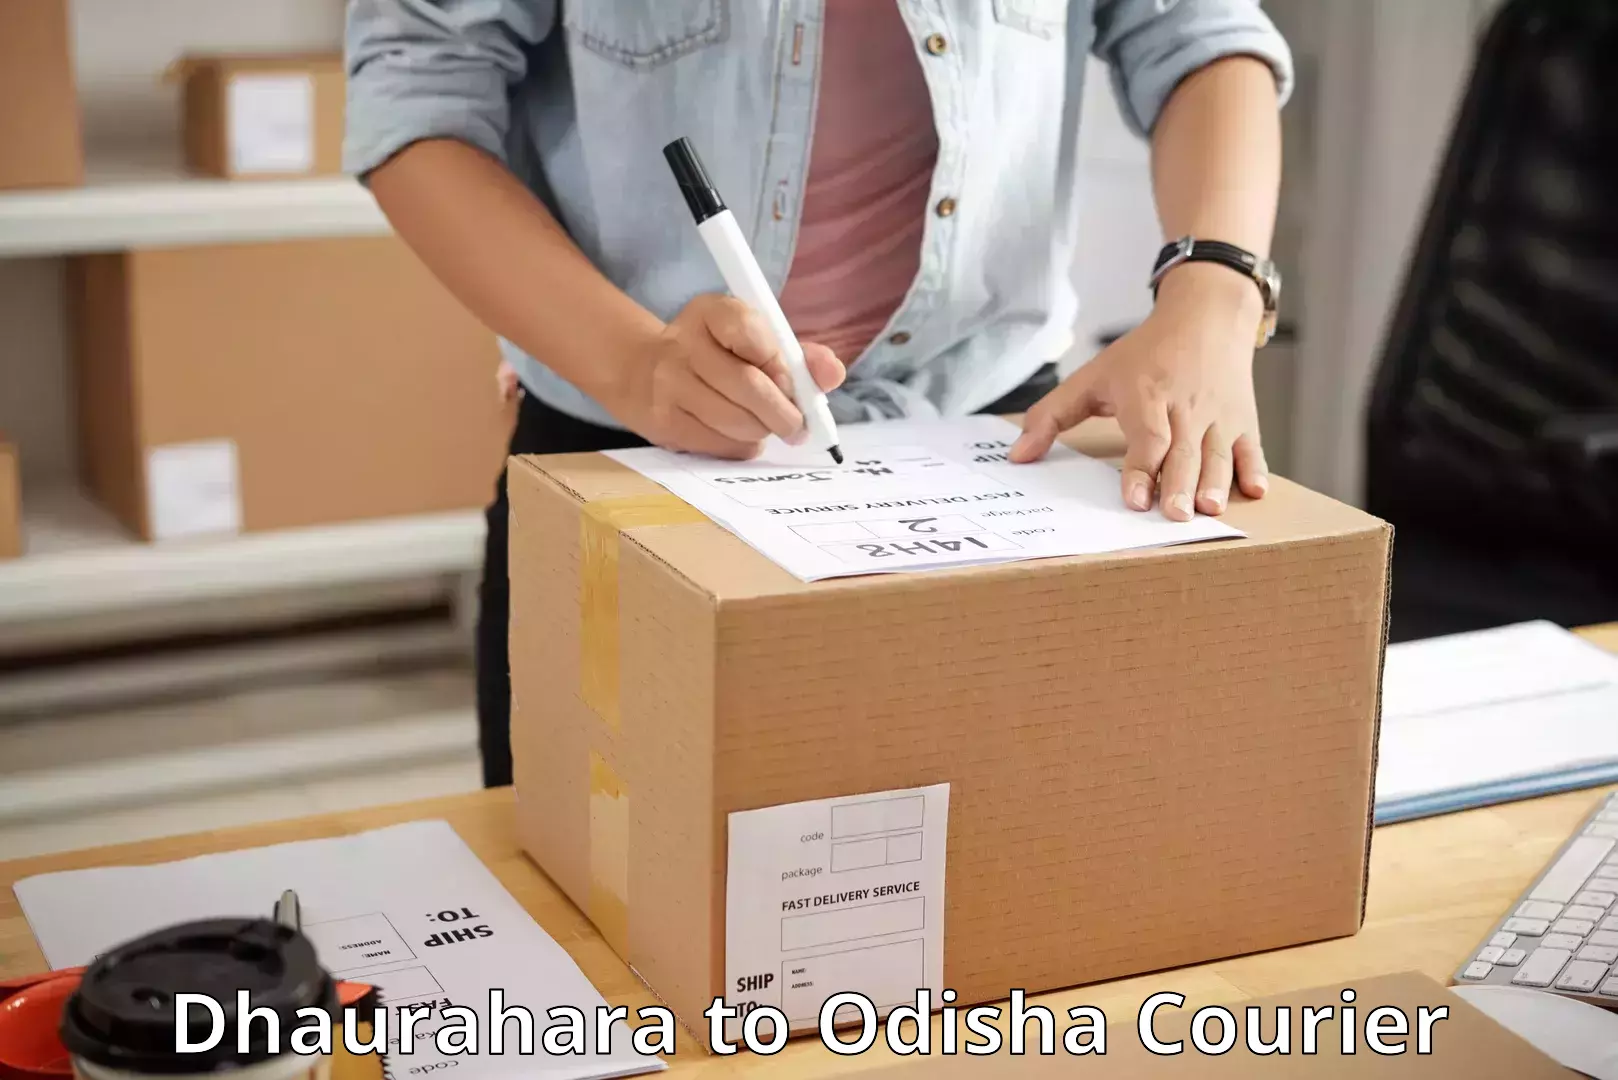 Courier service comparison Dhaurahara to Dhenkanal